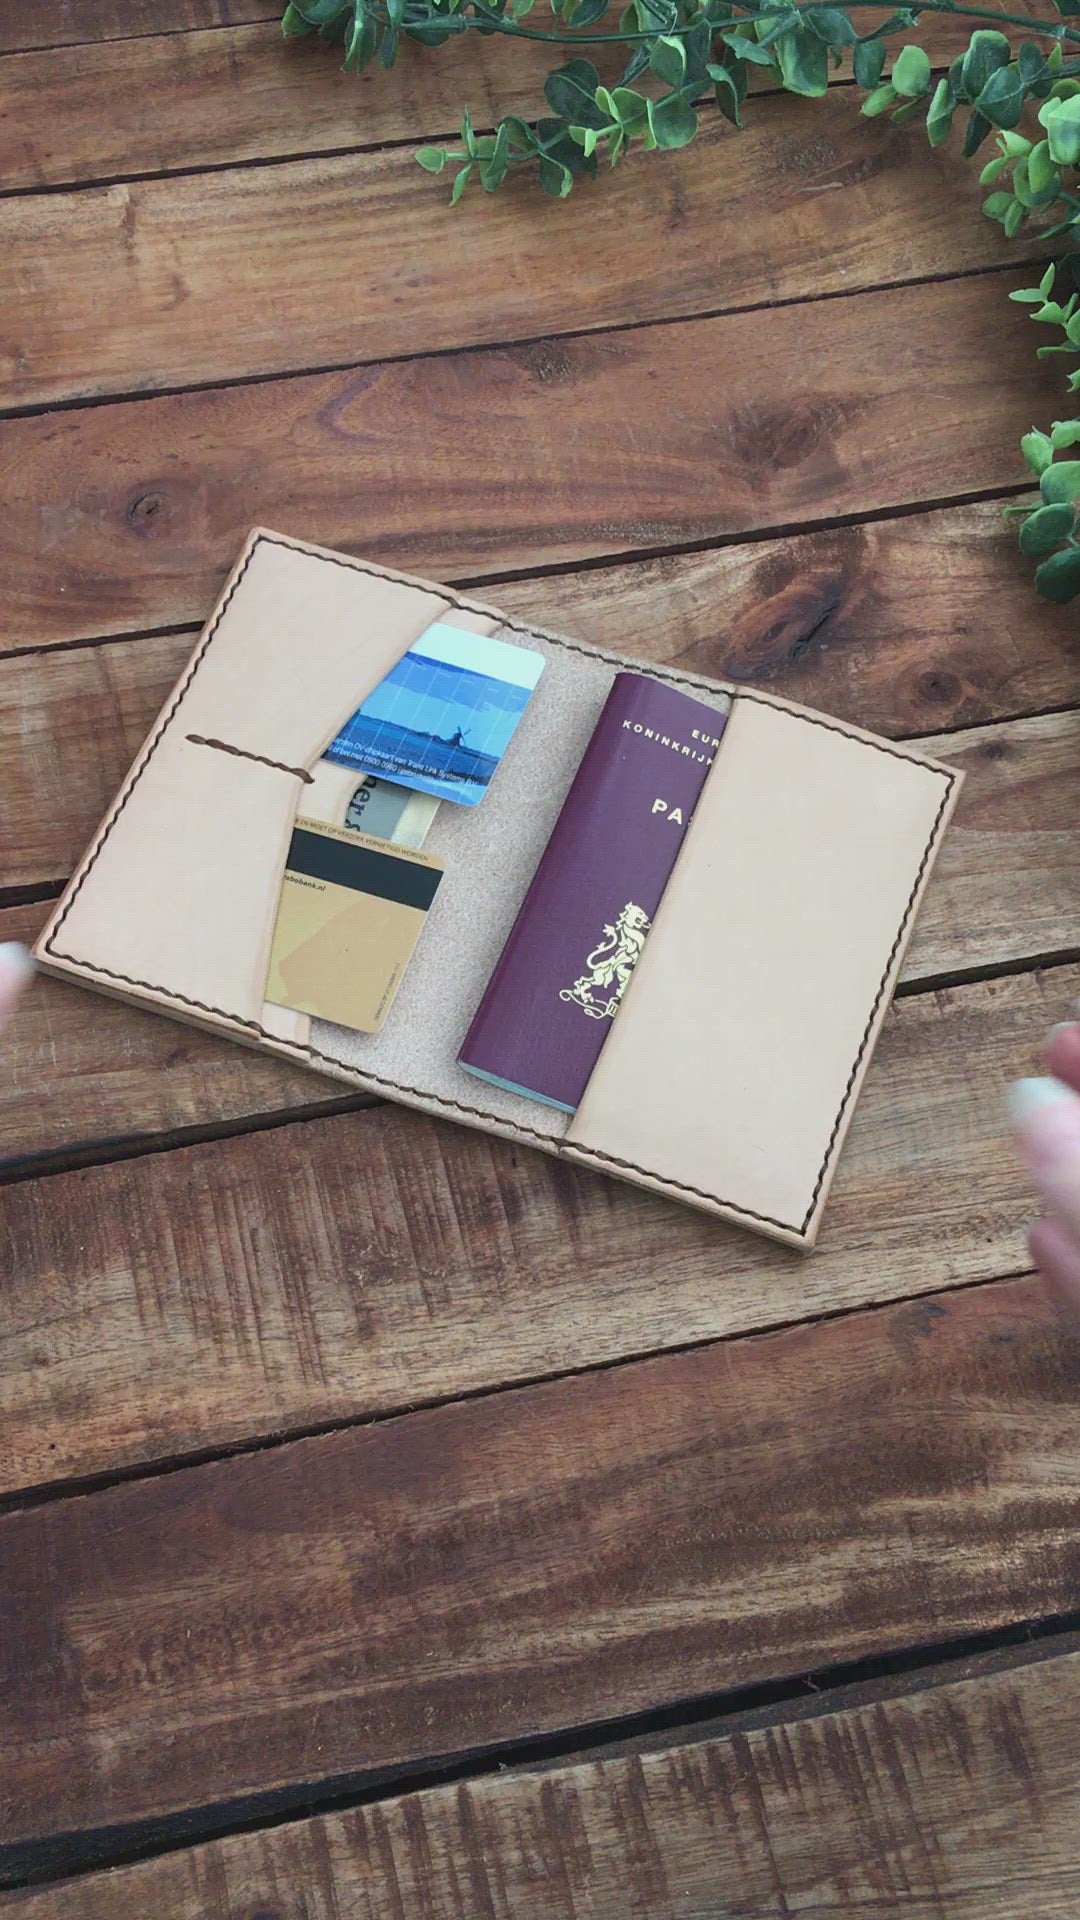 Video showing a Handmade Undyed Leather Passport Cover